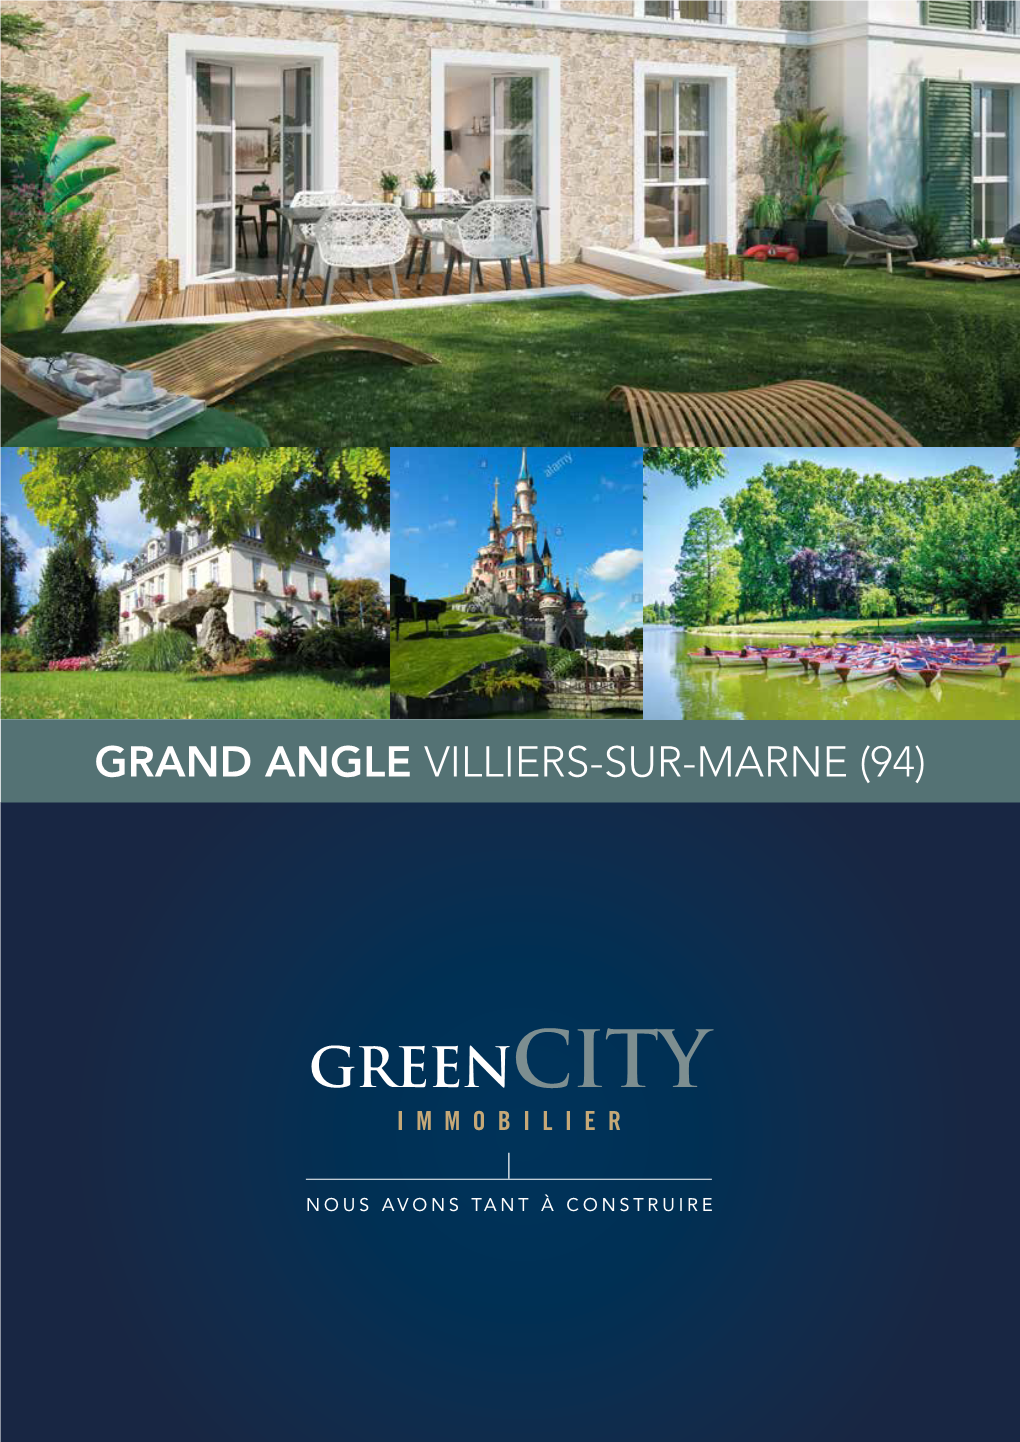 Grand Angle Villiers-Sur-Marne (94)